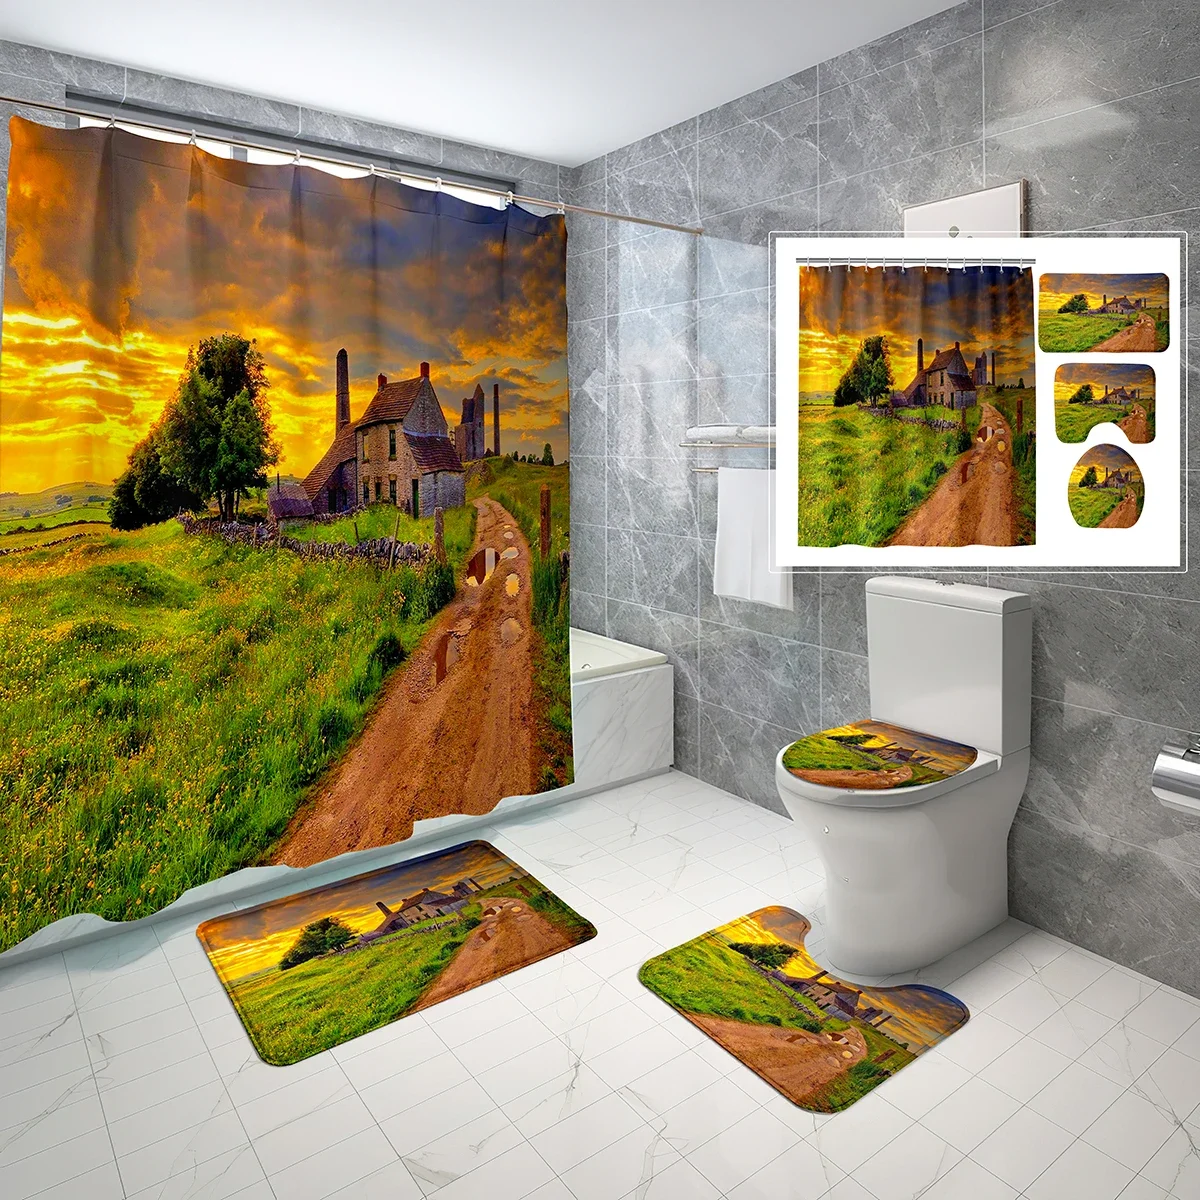 

4 Pcs British Country Town Shower Curtain Sets with Non-Slip Rugs Mat Toilet Lid Sunset Meadow Waterproof Shower Curtain Set